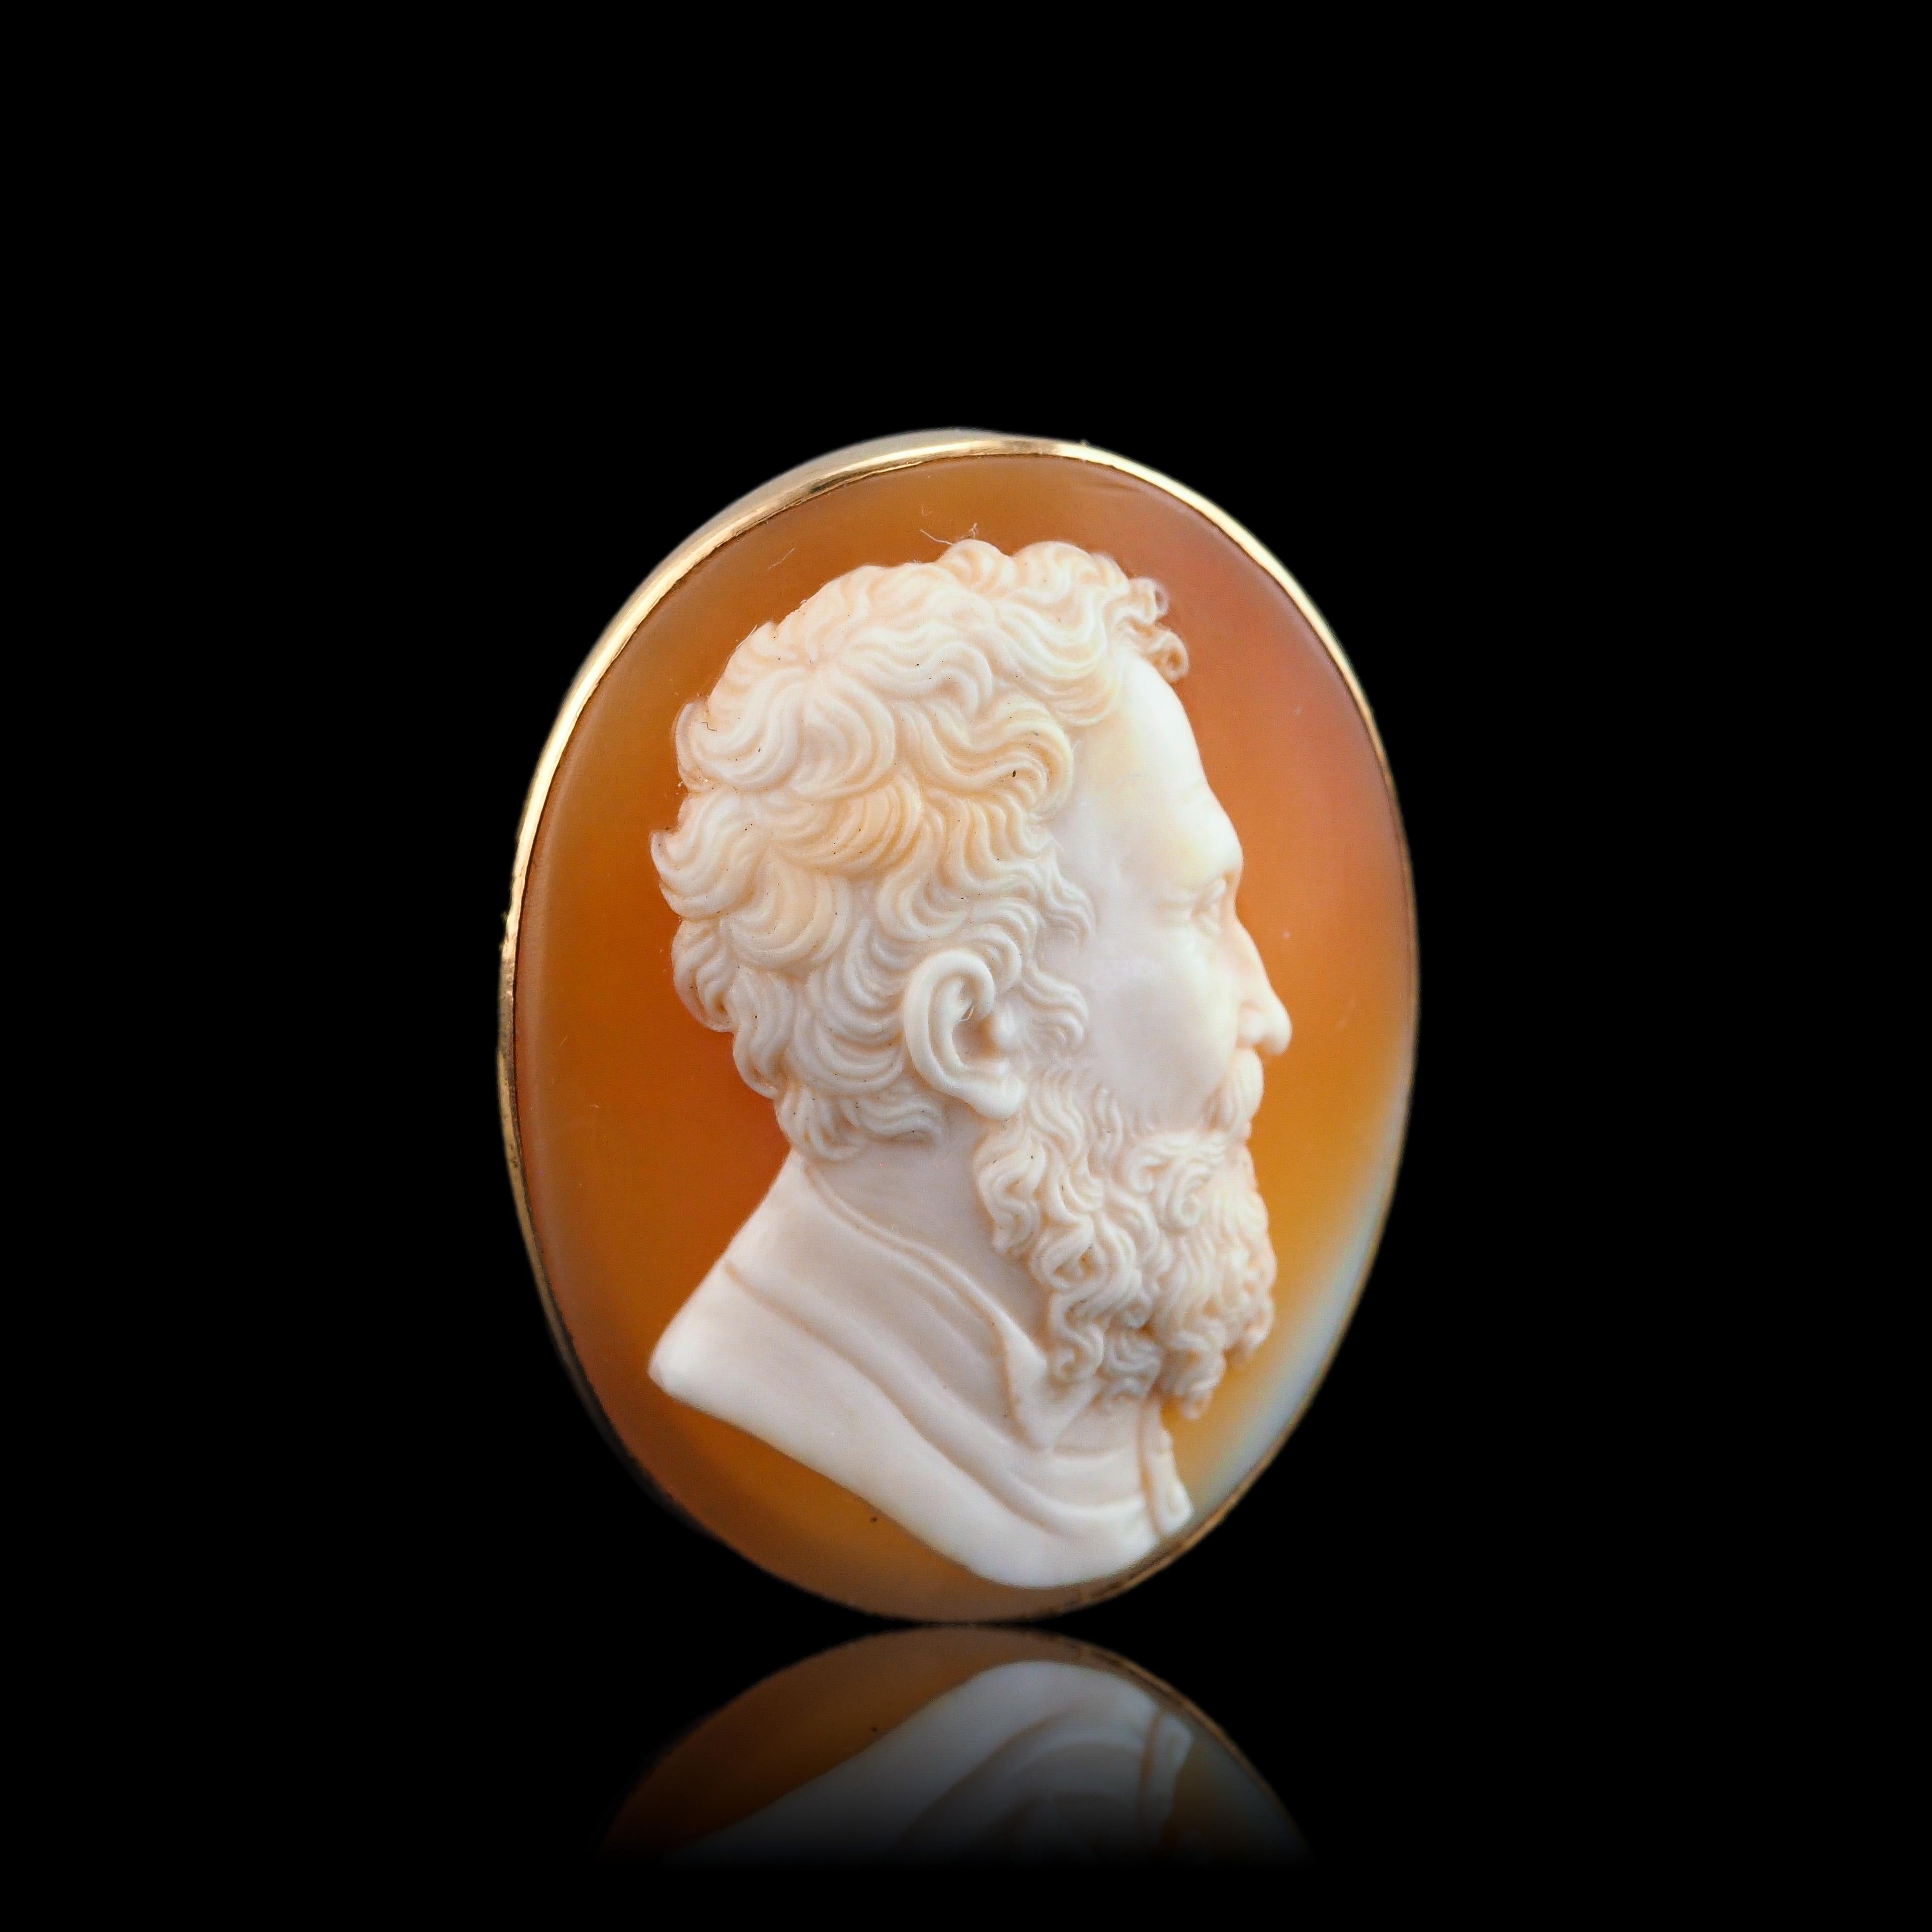 Antique Victorian Cameo Brooch 14K Gold with Portrait of a Gentleman - c.1890 6